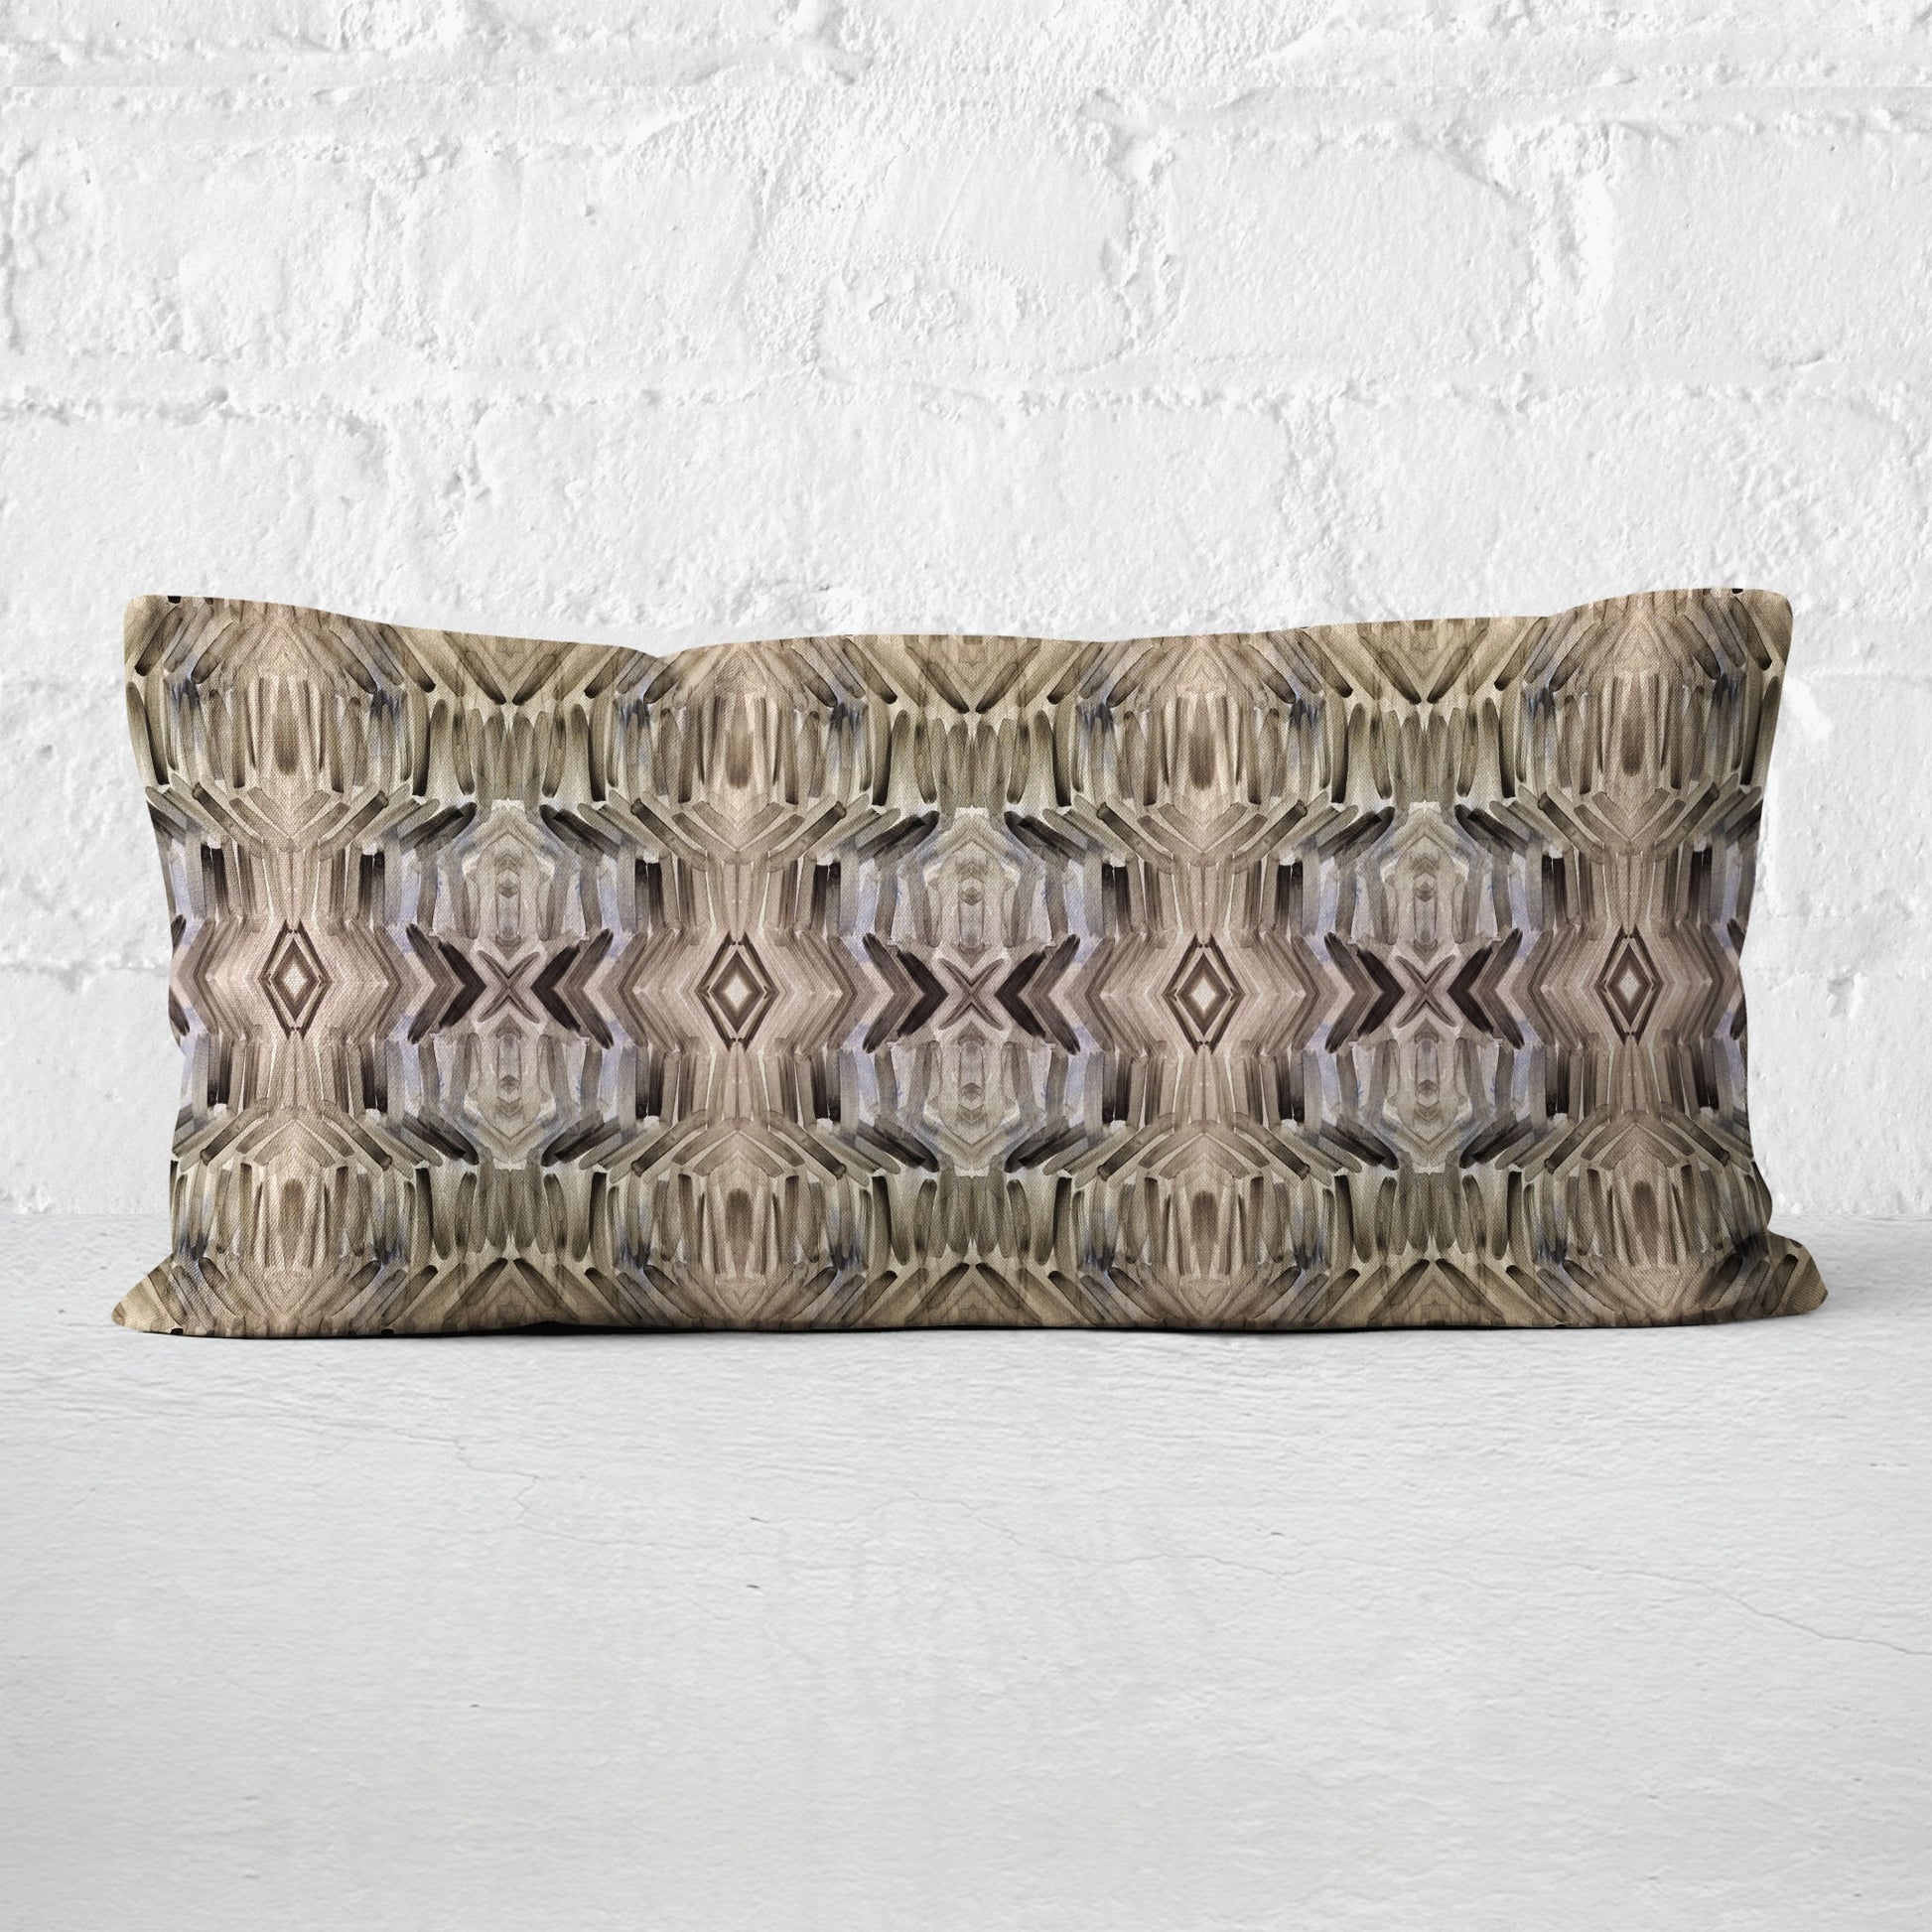 12x24 rectangular pillow featuring a brown abstract hand-painted pattern leaning up against a white brick wall.